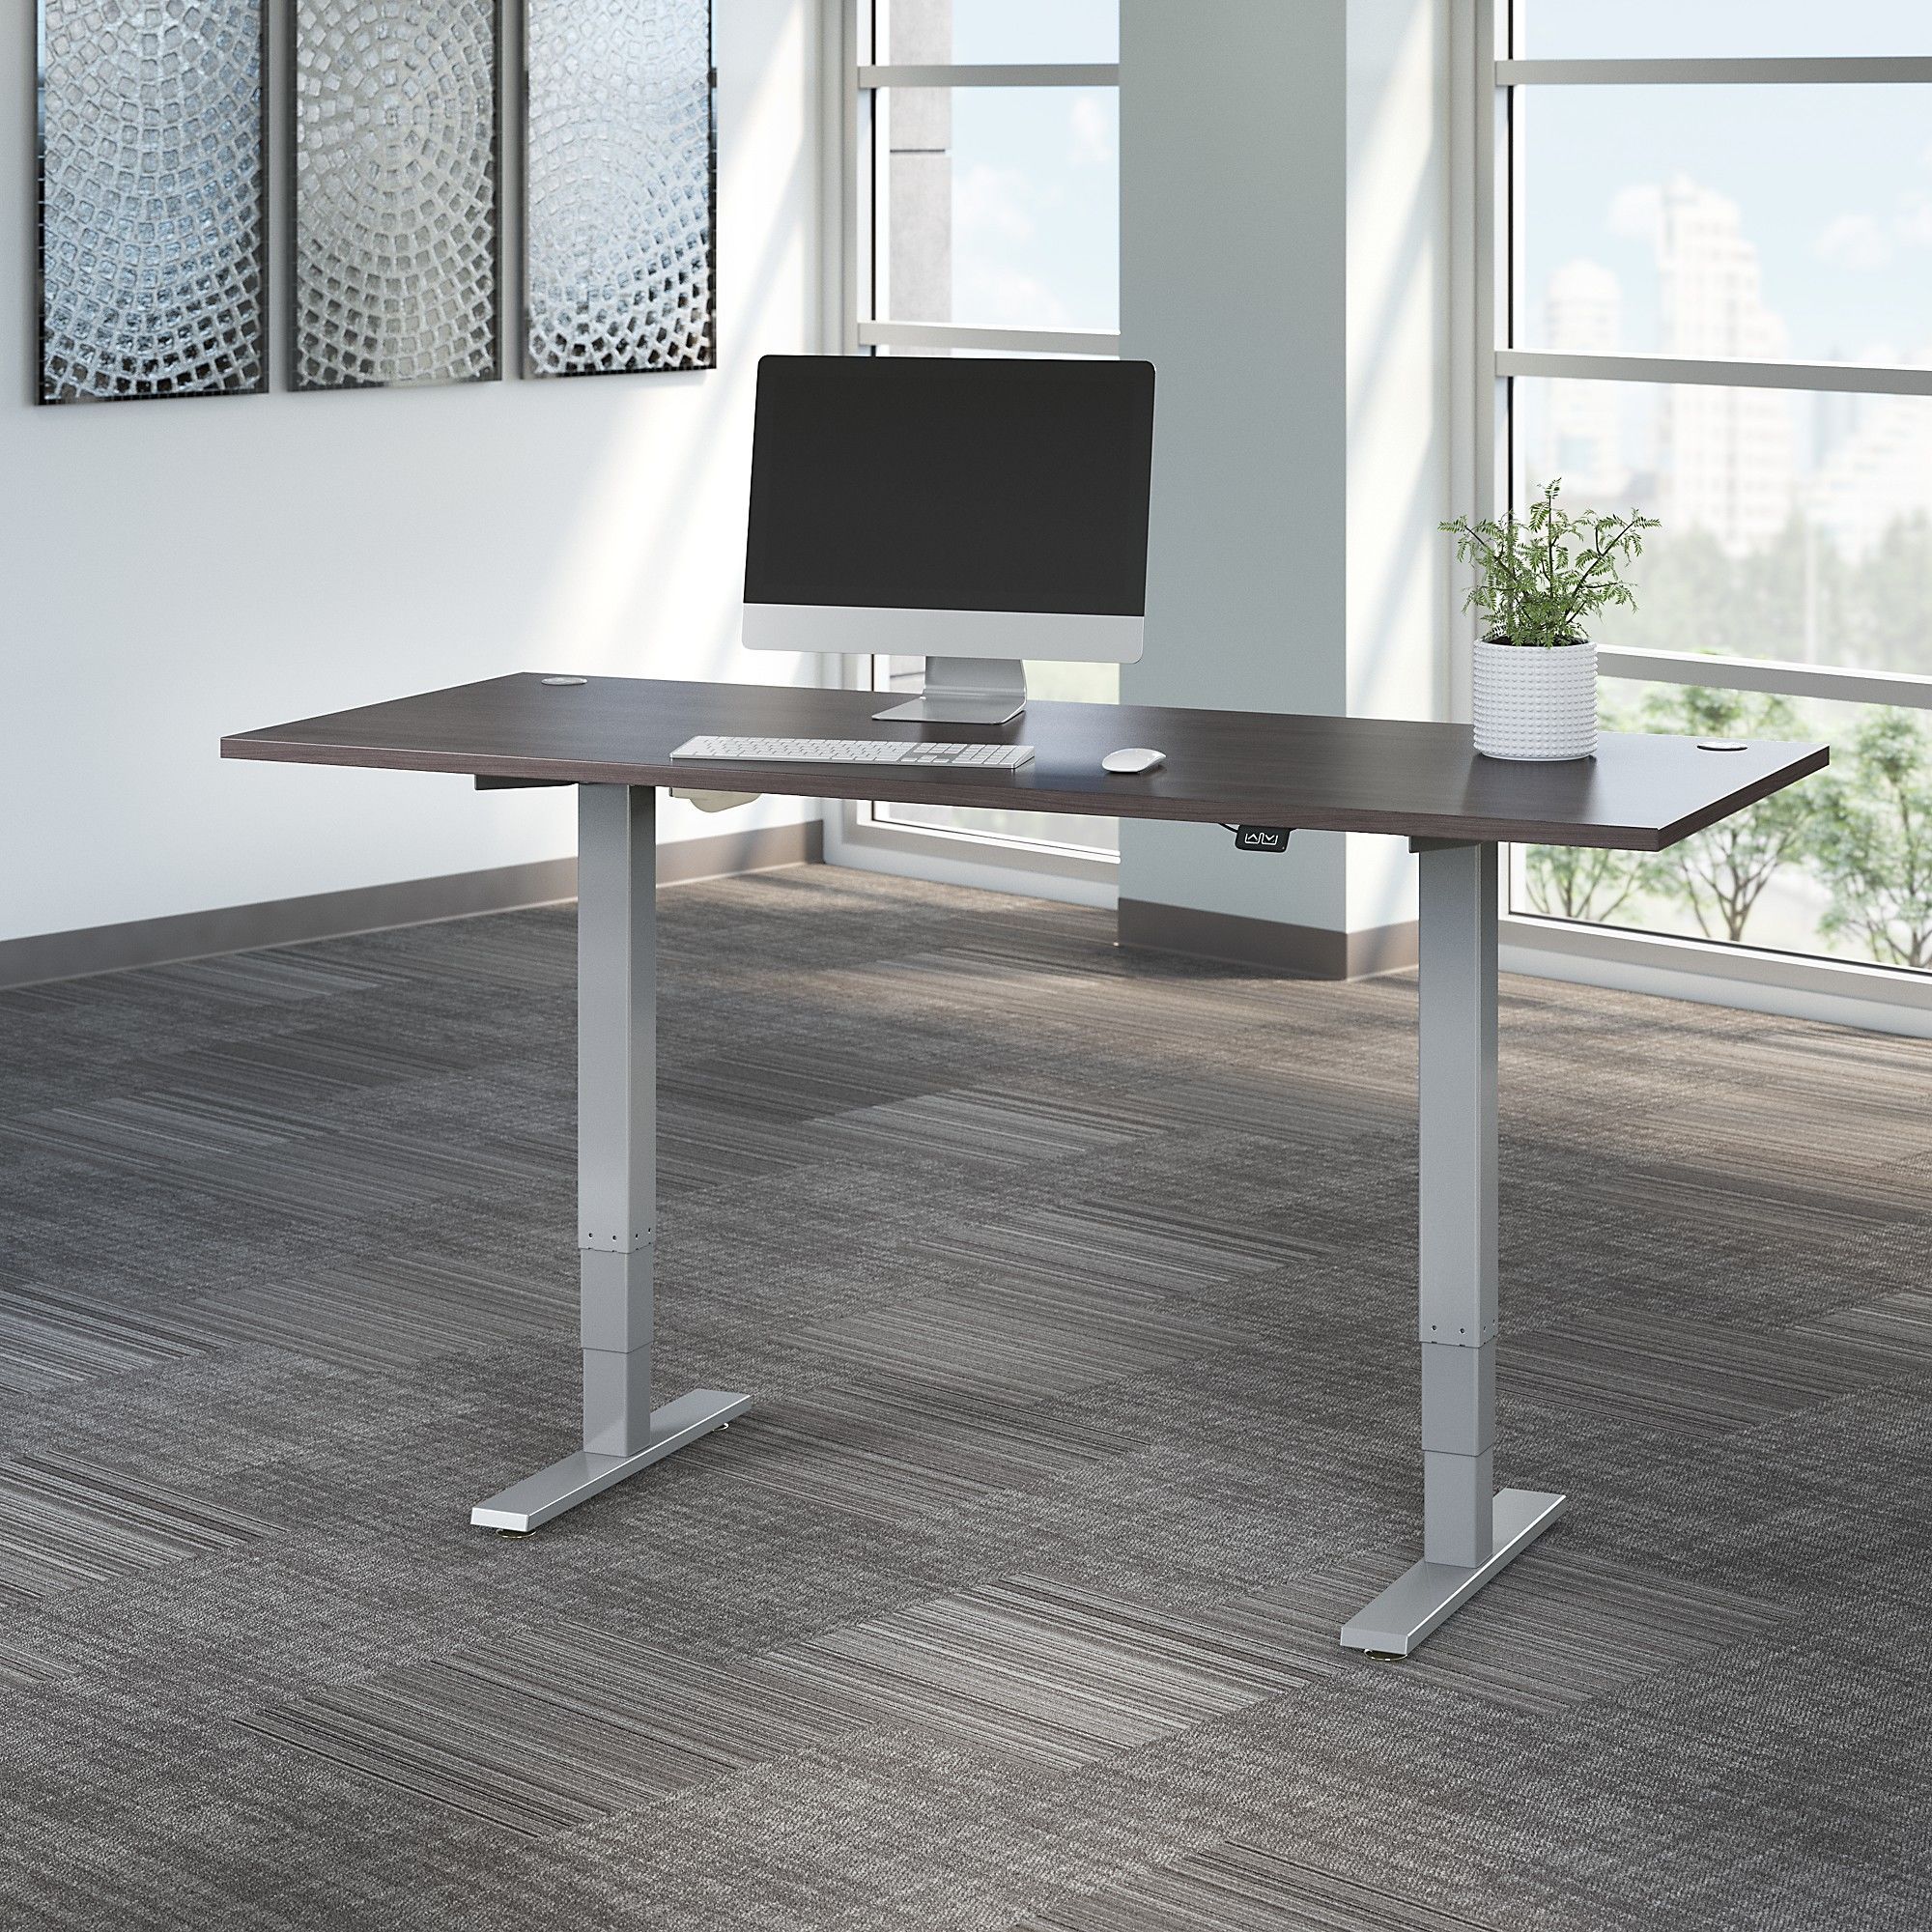 72w X 30d Electric Height Adjustable Standing Desk In Storm Gray Inside Adjustable Electric Lift Desks (View 4 of 15)